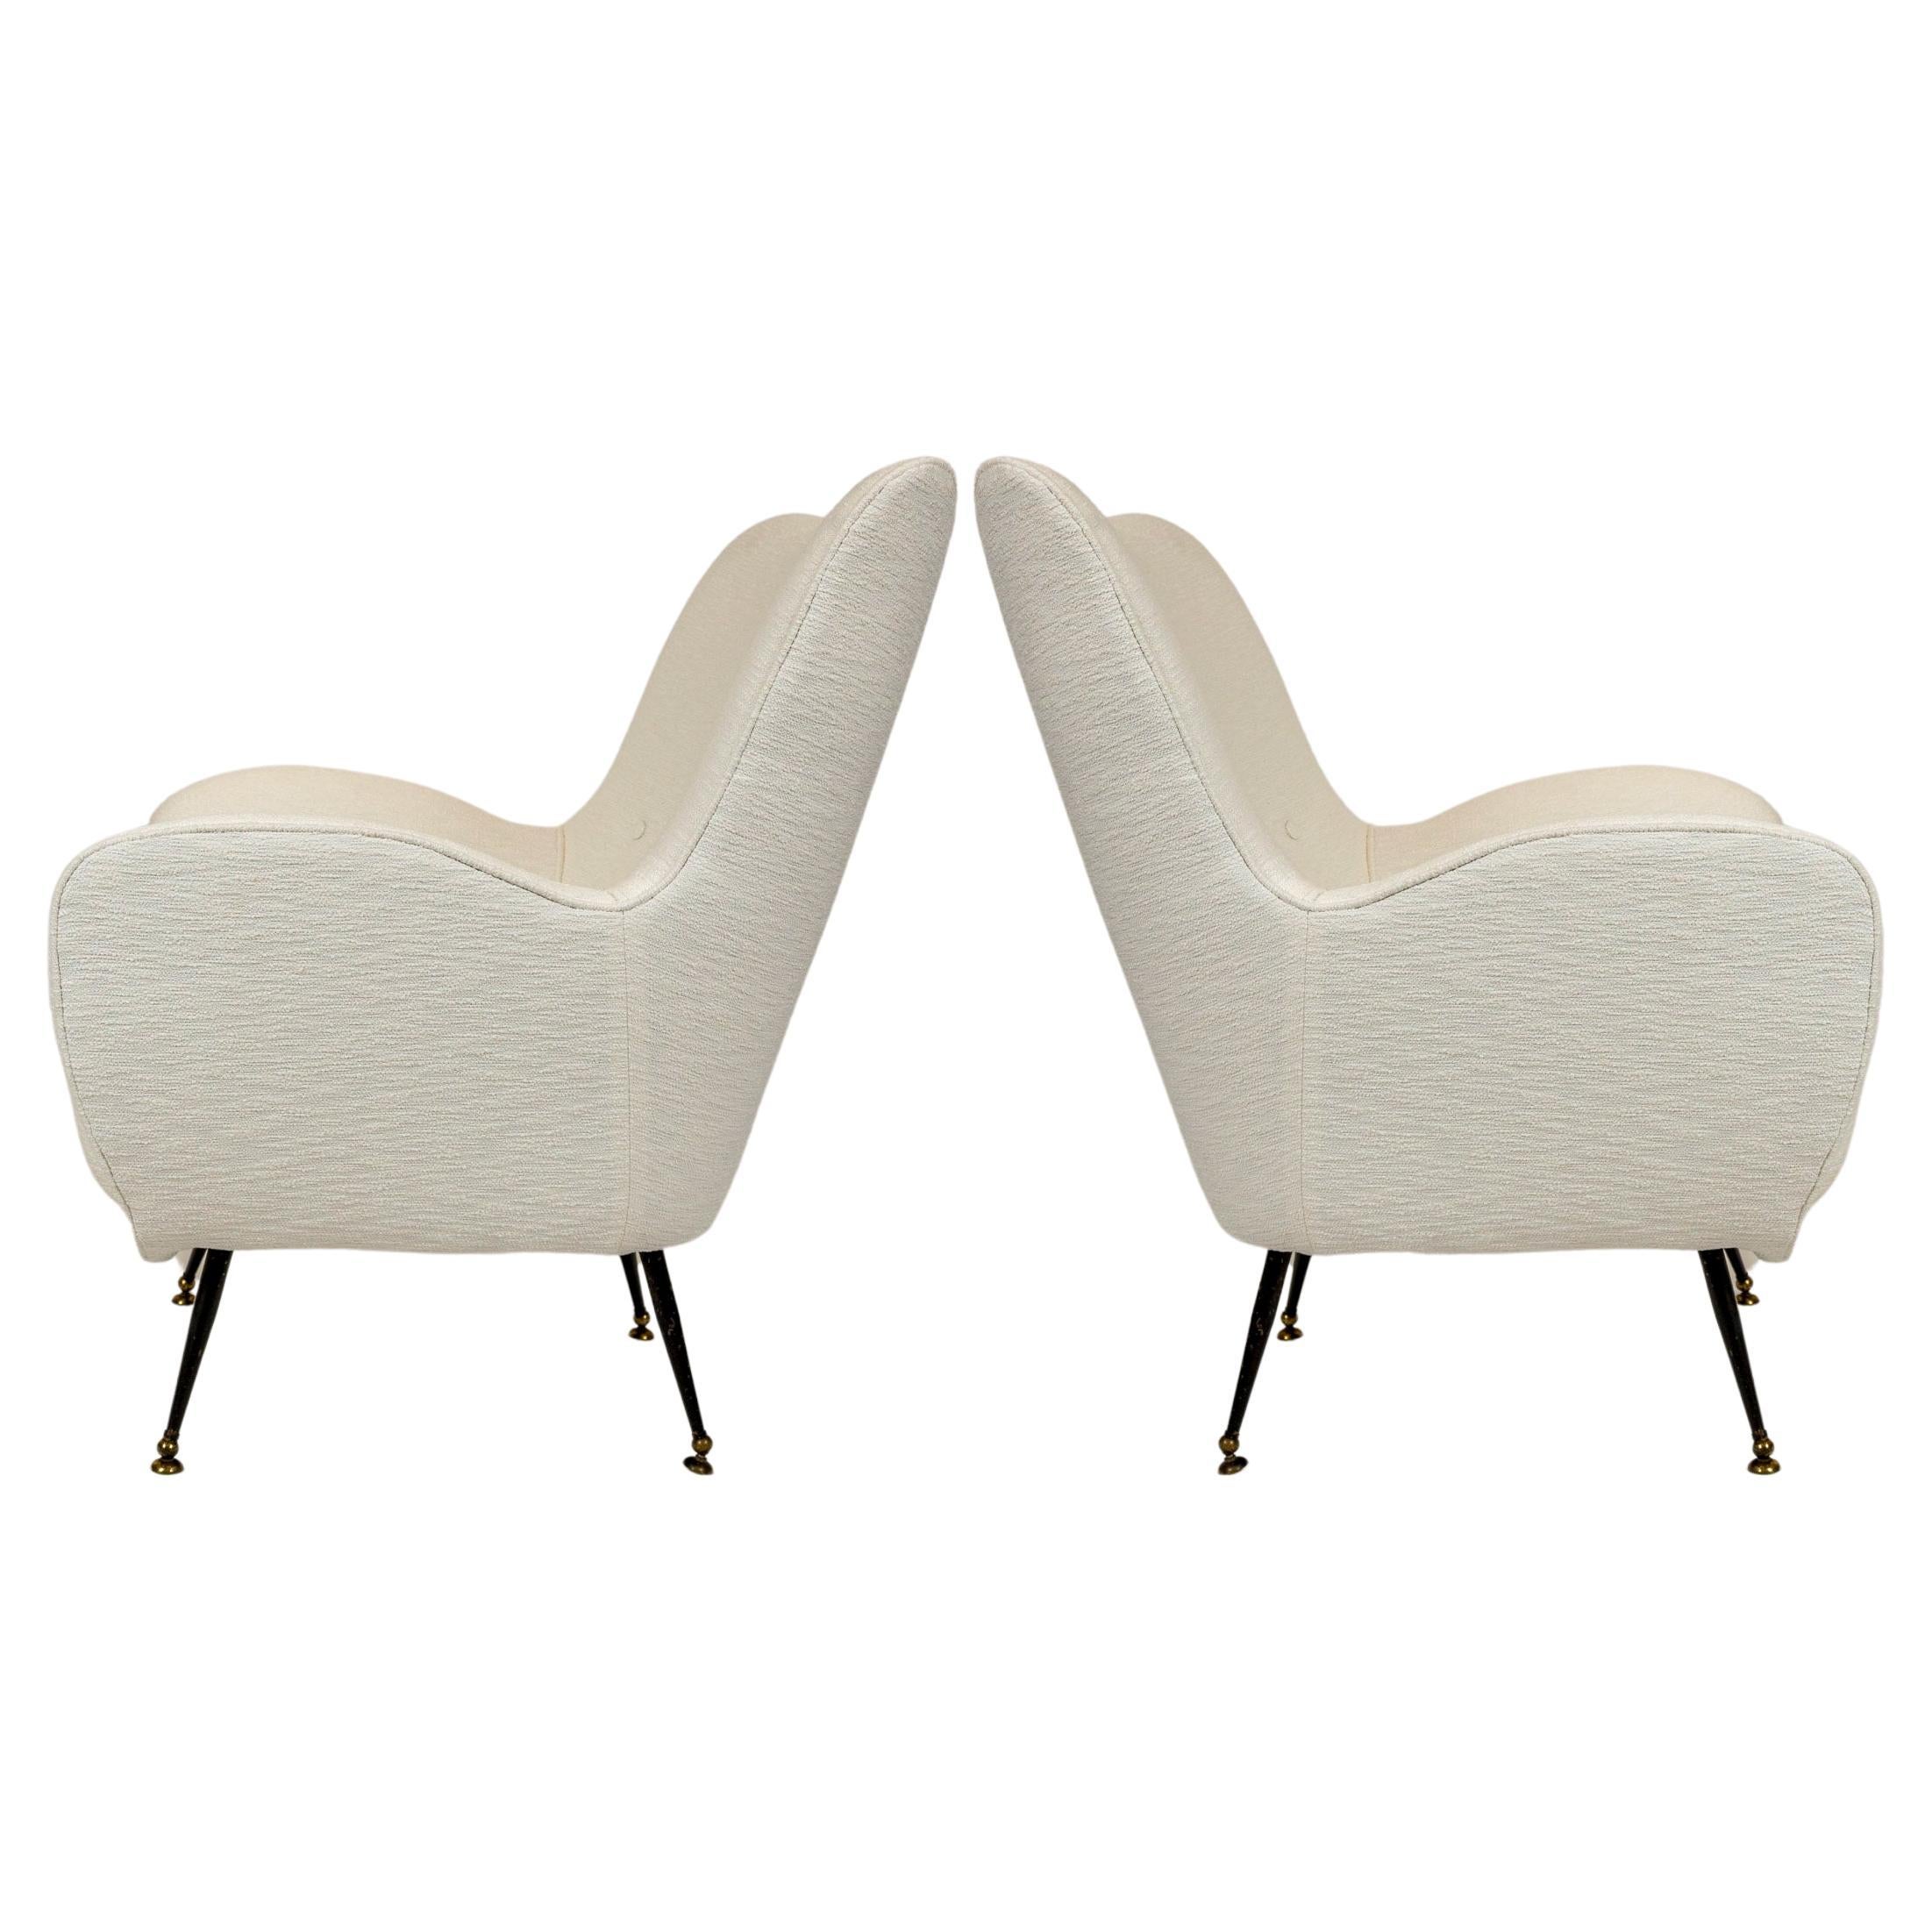 A period mid century pair of newly upholstered chairs with their original painted steel and brass legs.  The brass feet rotate to adapt to uneven flooring a detail seen in orginal mid century chairs.

The curving lines of these chairs are unique and